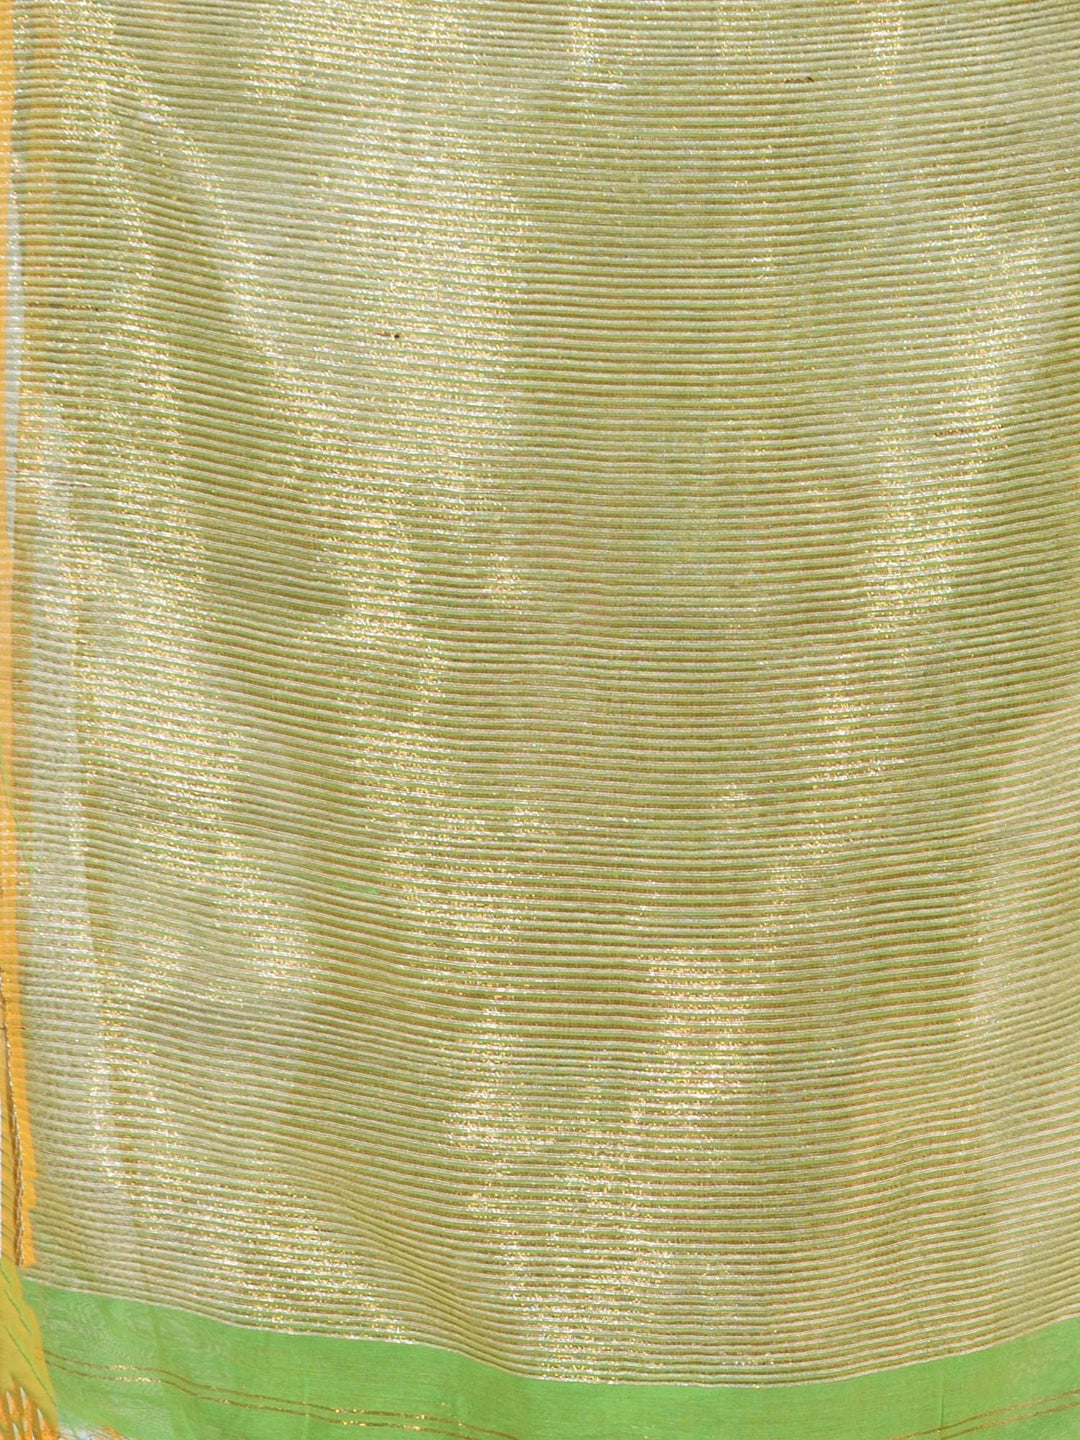 CHARUKRITI Green Blended Cotton Handwoven Saree with Zari Pallu with Unstitched Blouse